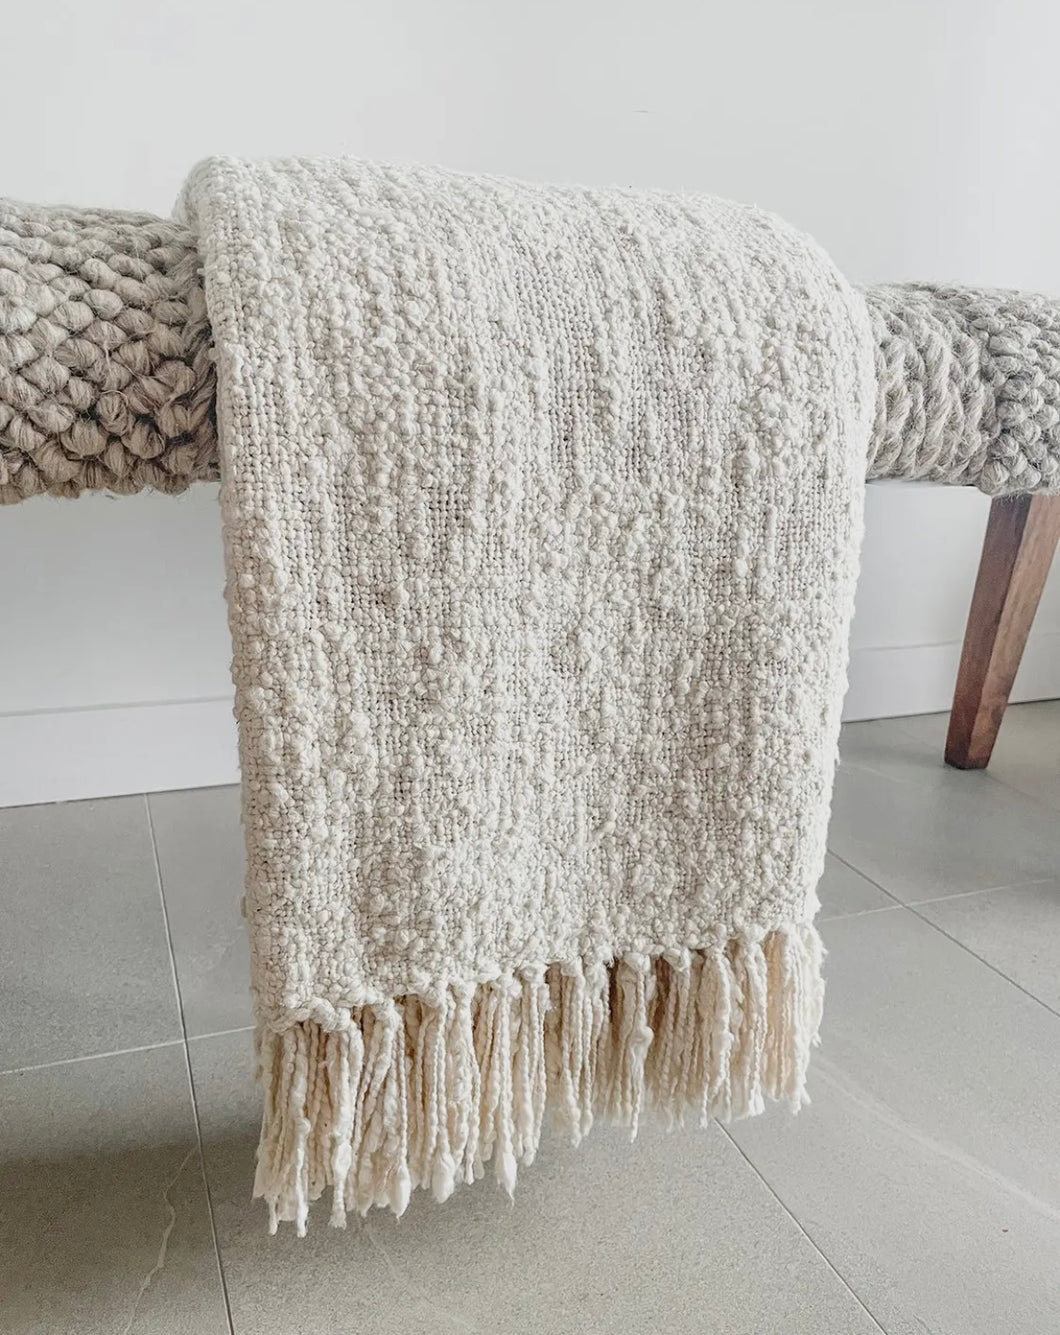 Cozy Cotton Boucle Throw with Fringe